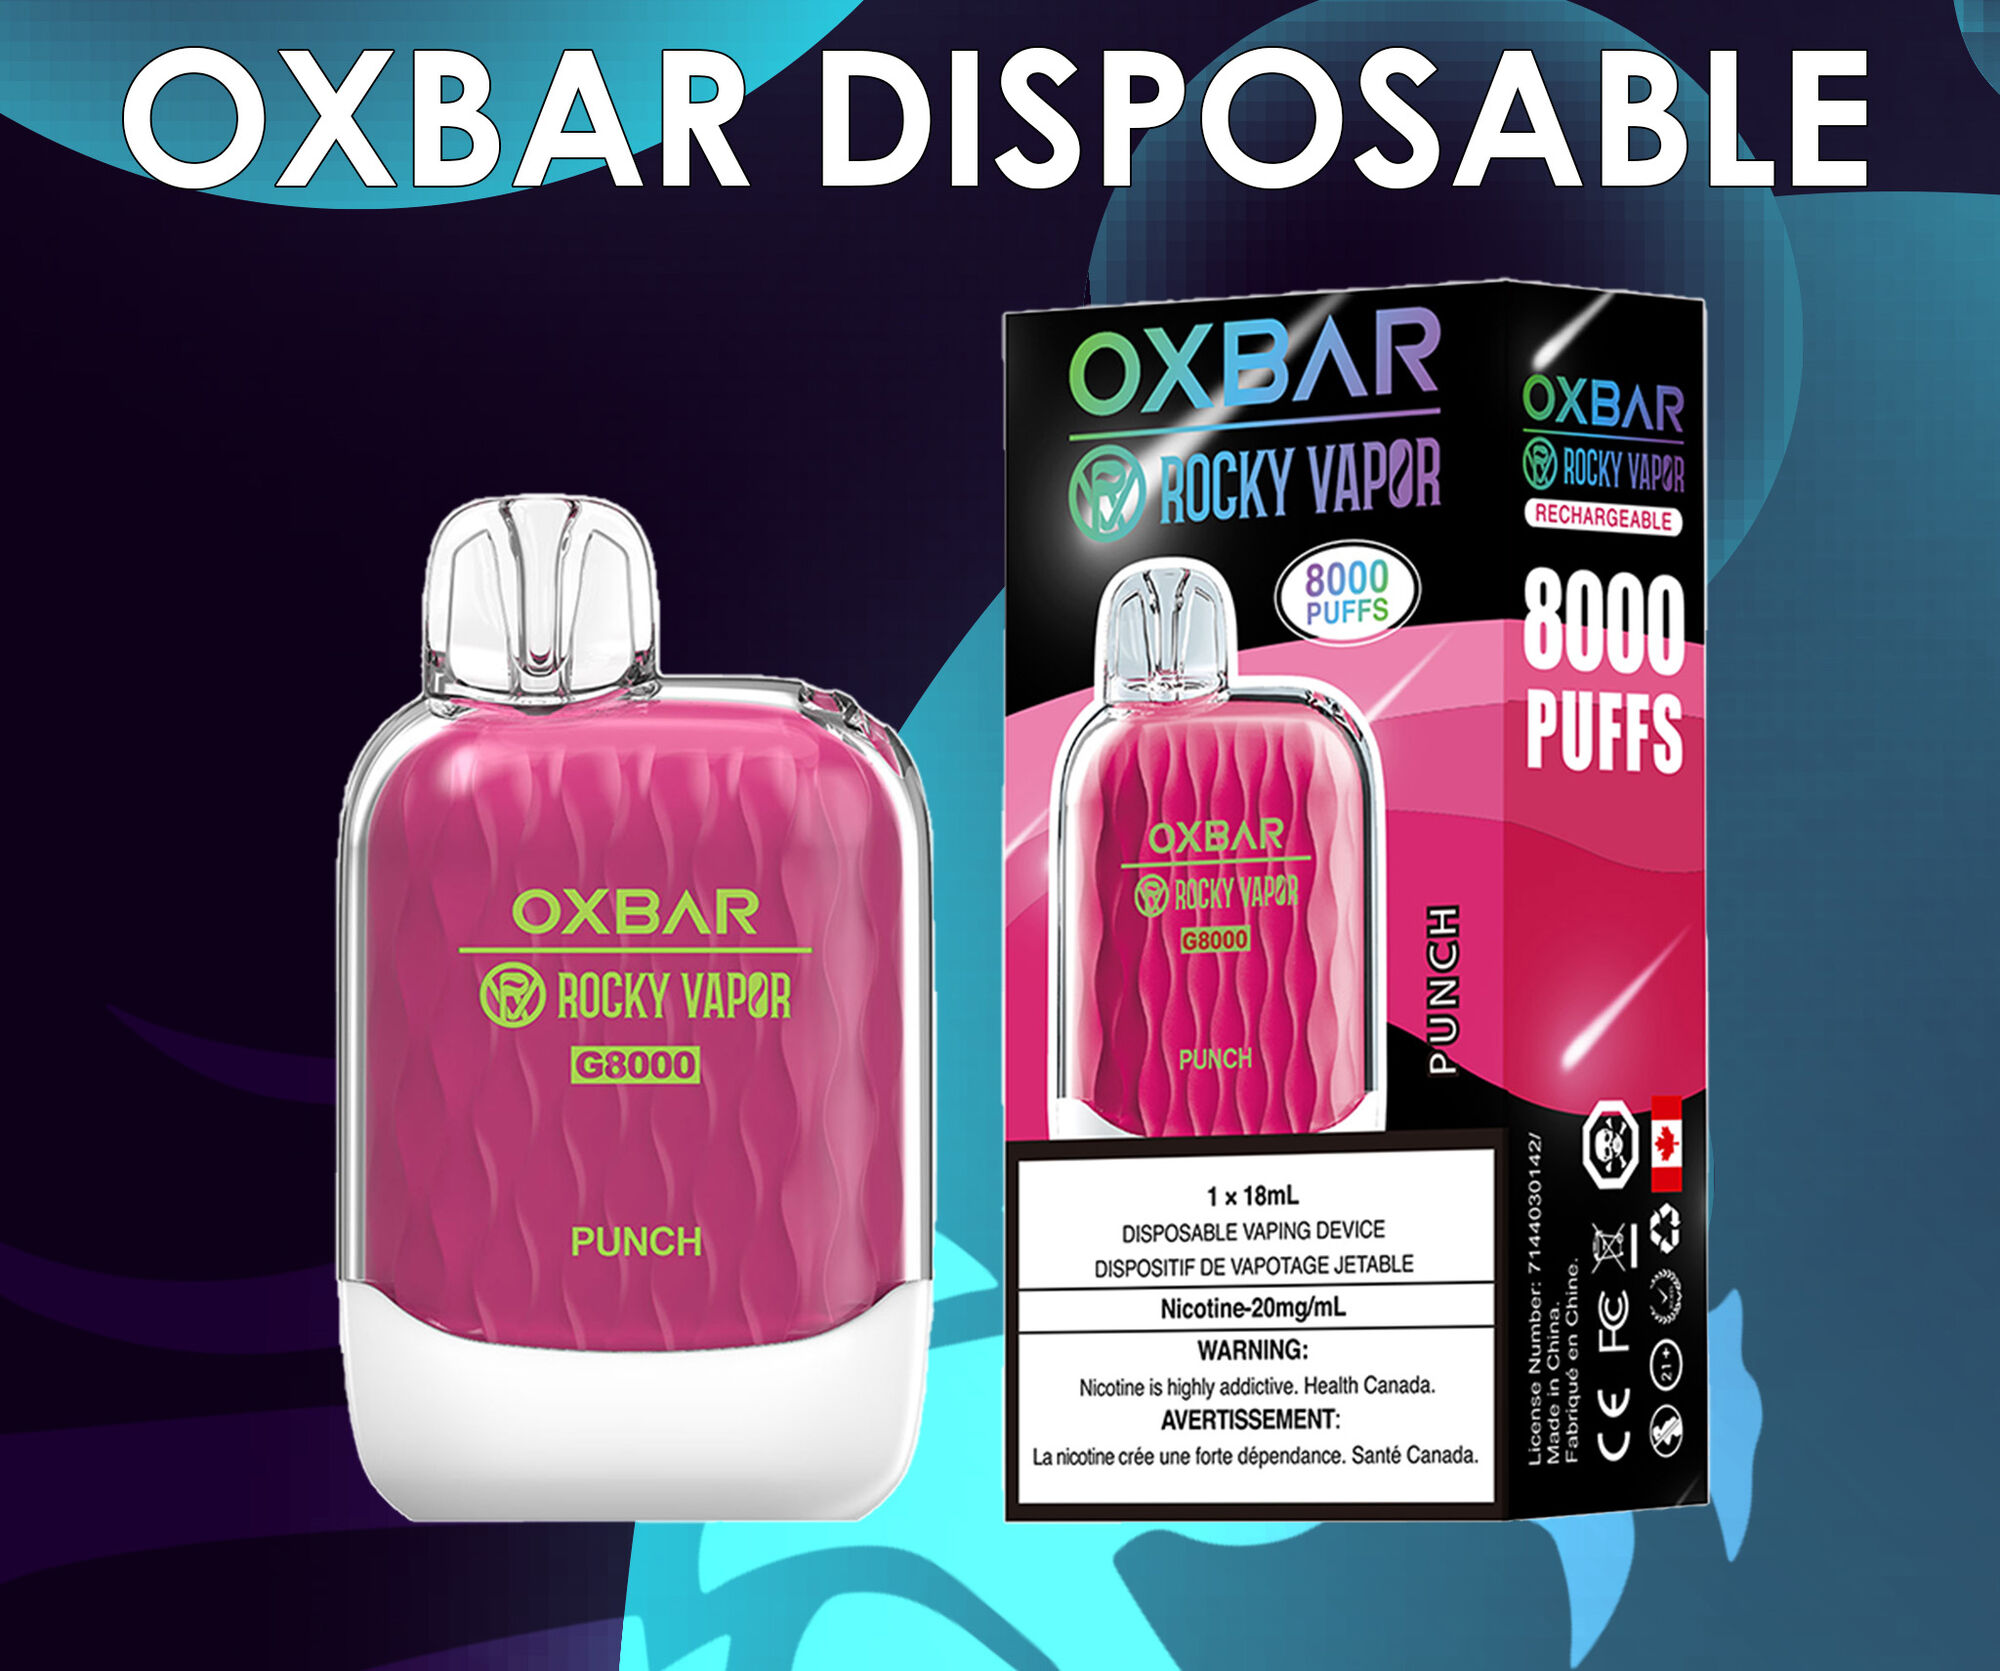  V G OXBAR @ ROCKY, VAPGR 1x18mL DISPOSABLE VAPING DEVICE DISPOSITIF DE VAPOTAGE JETABLE Nicotine-20mgmL WARNING: Nicotine is highly addictive. Health Canada. AVERTISSEMENT: La nicotine cre une forte dpendance. Sant Canada. h bt 2 3 . S 